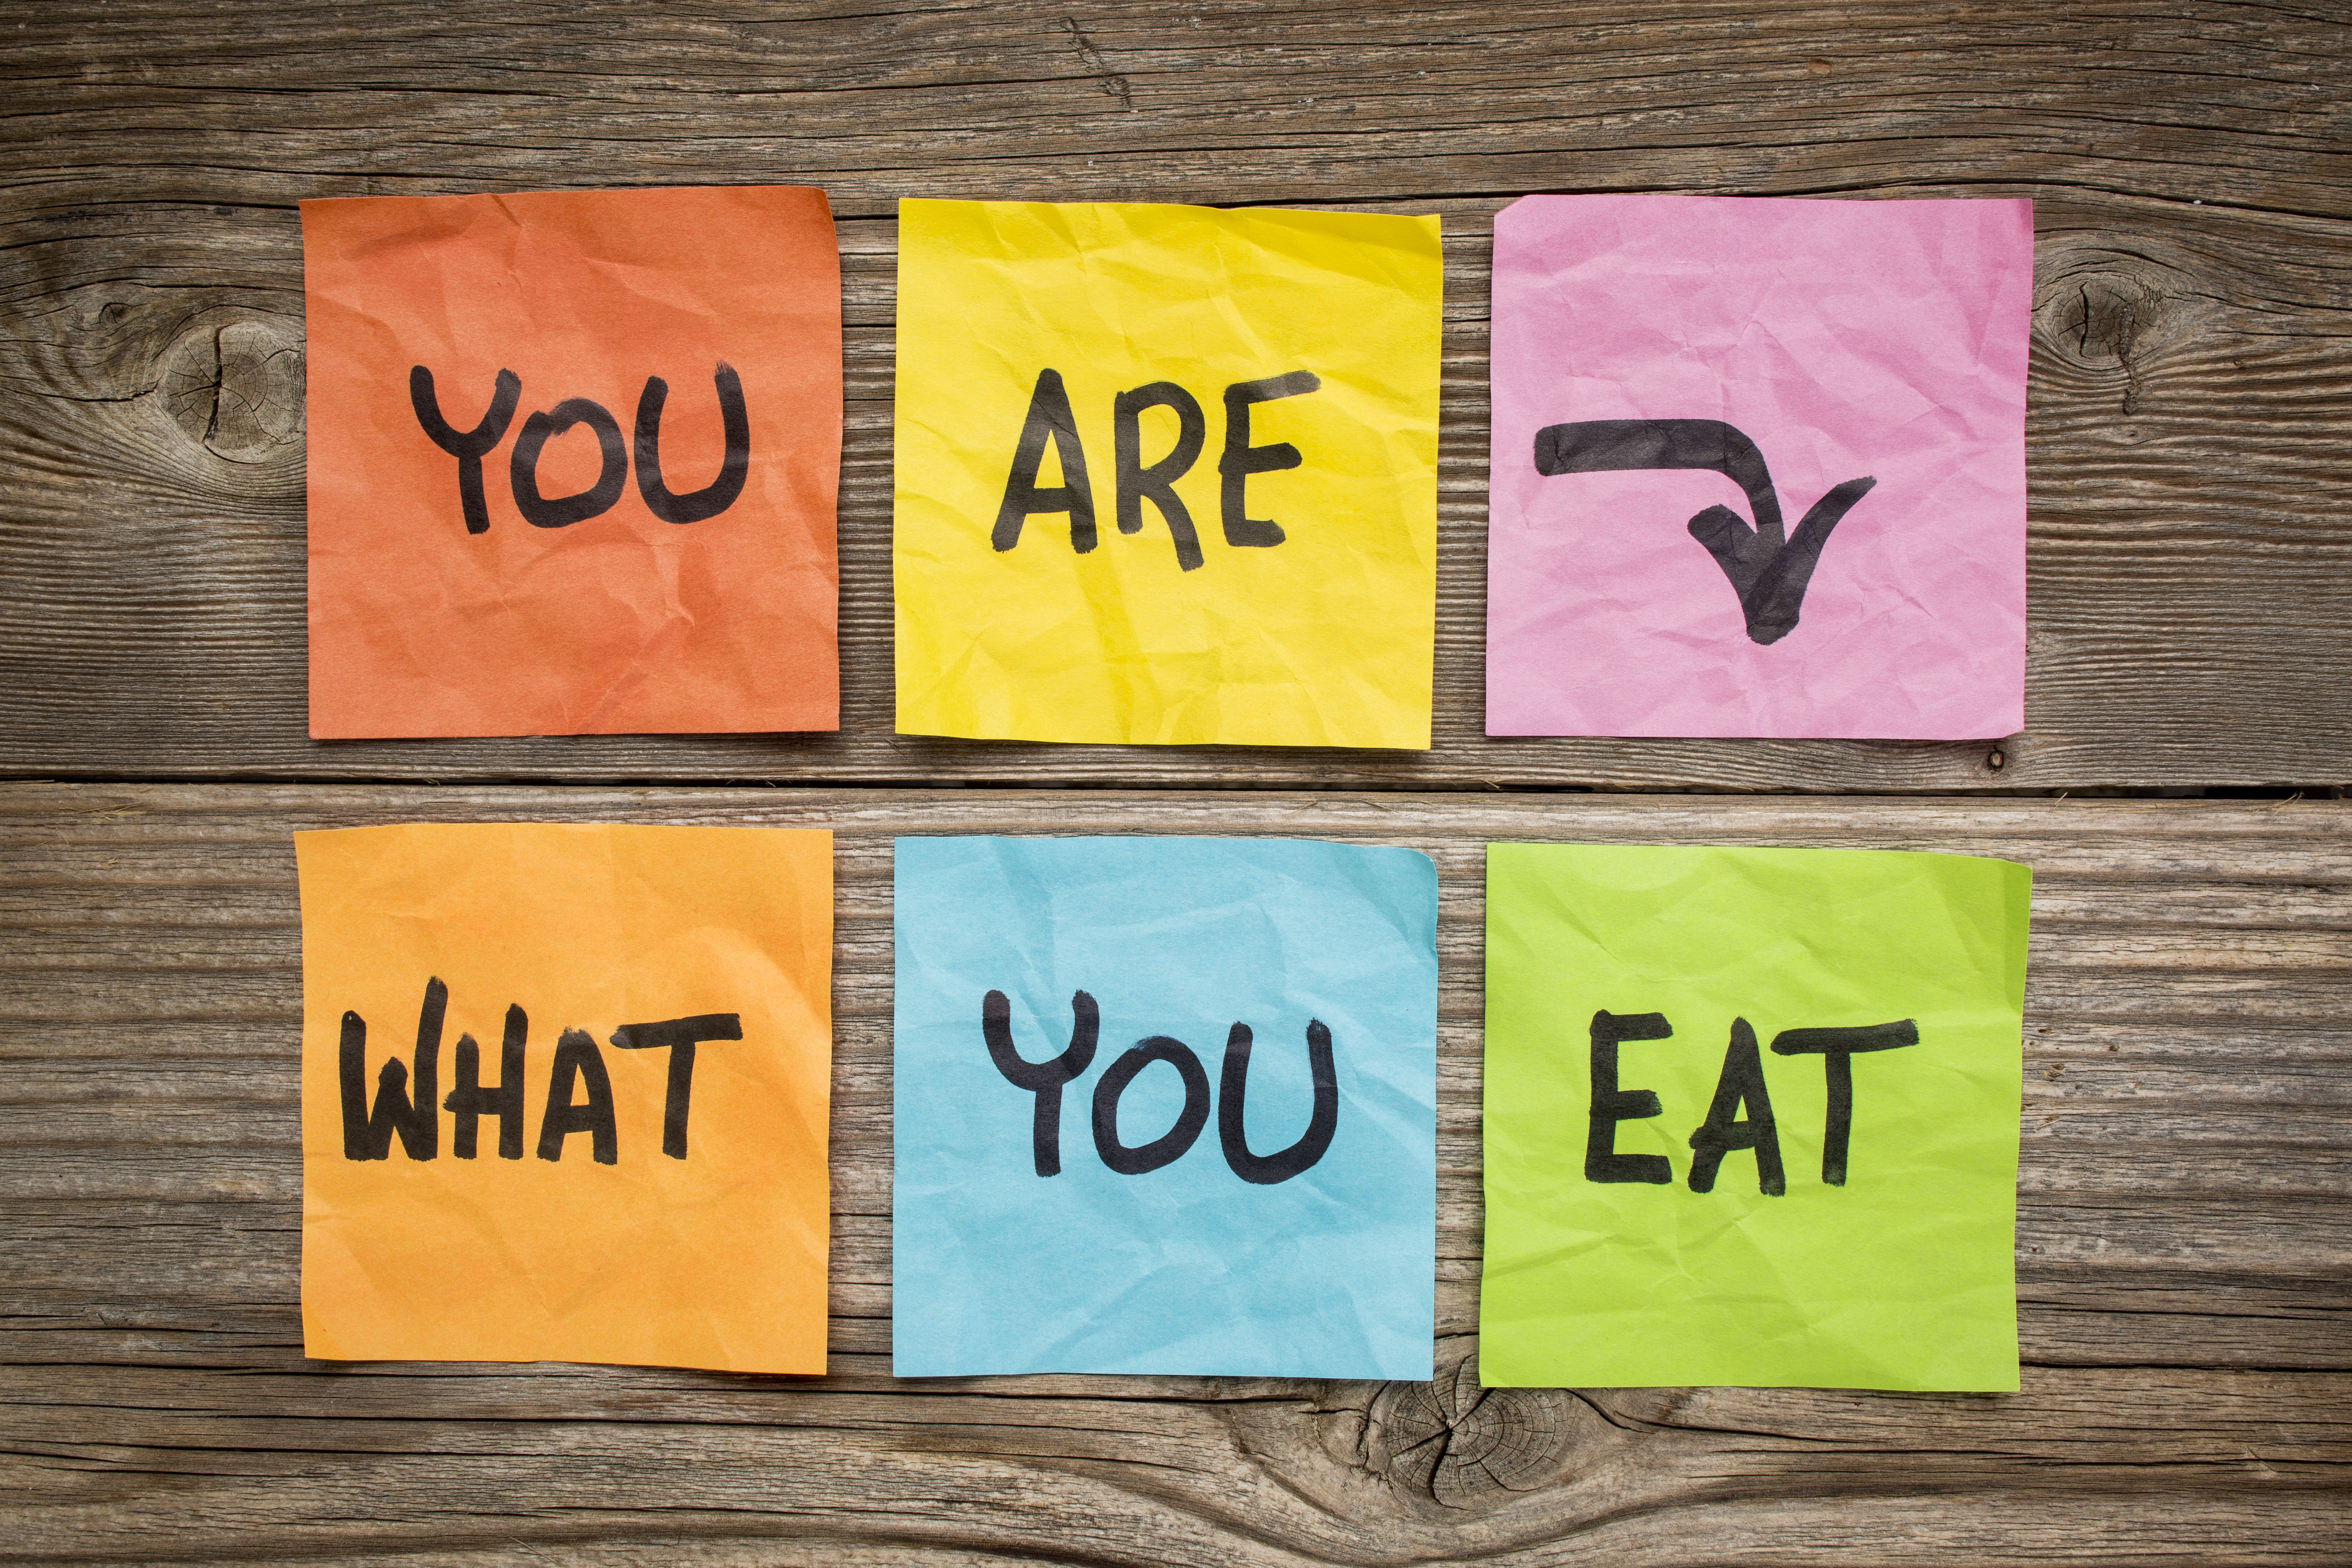 We eat перевод. You are what you eat картинки. You are what you eat проект. Проект на тему you are what you eat 8 класс. Проект you are what you eat 8 класс.